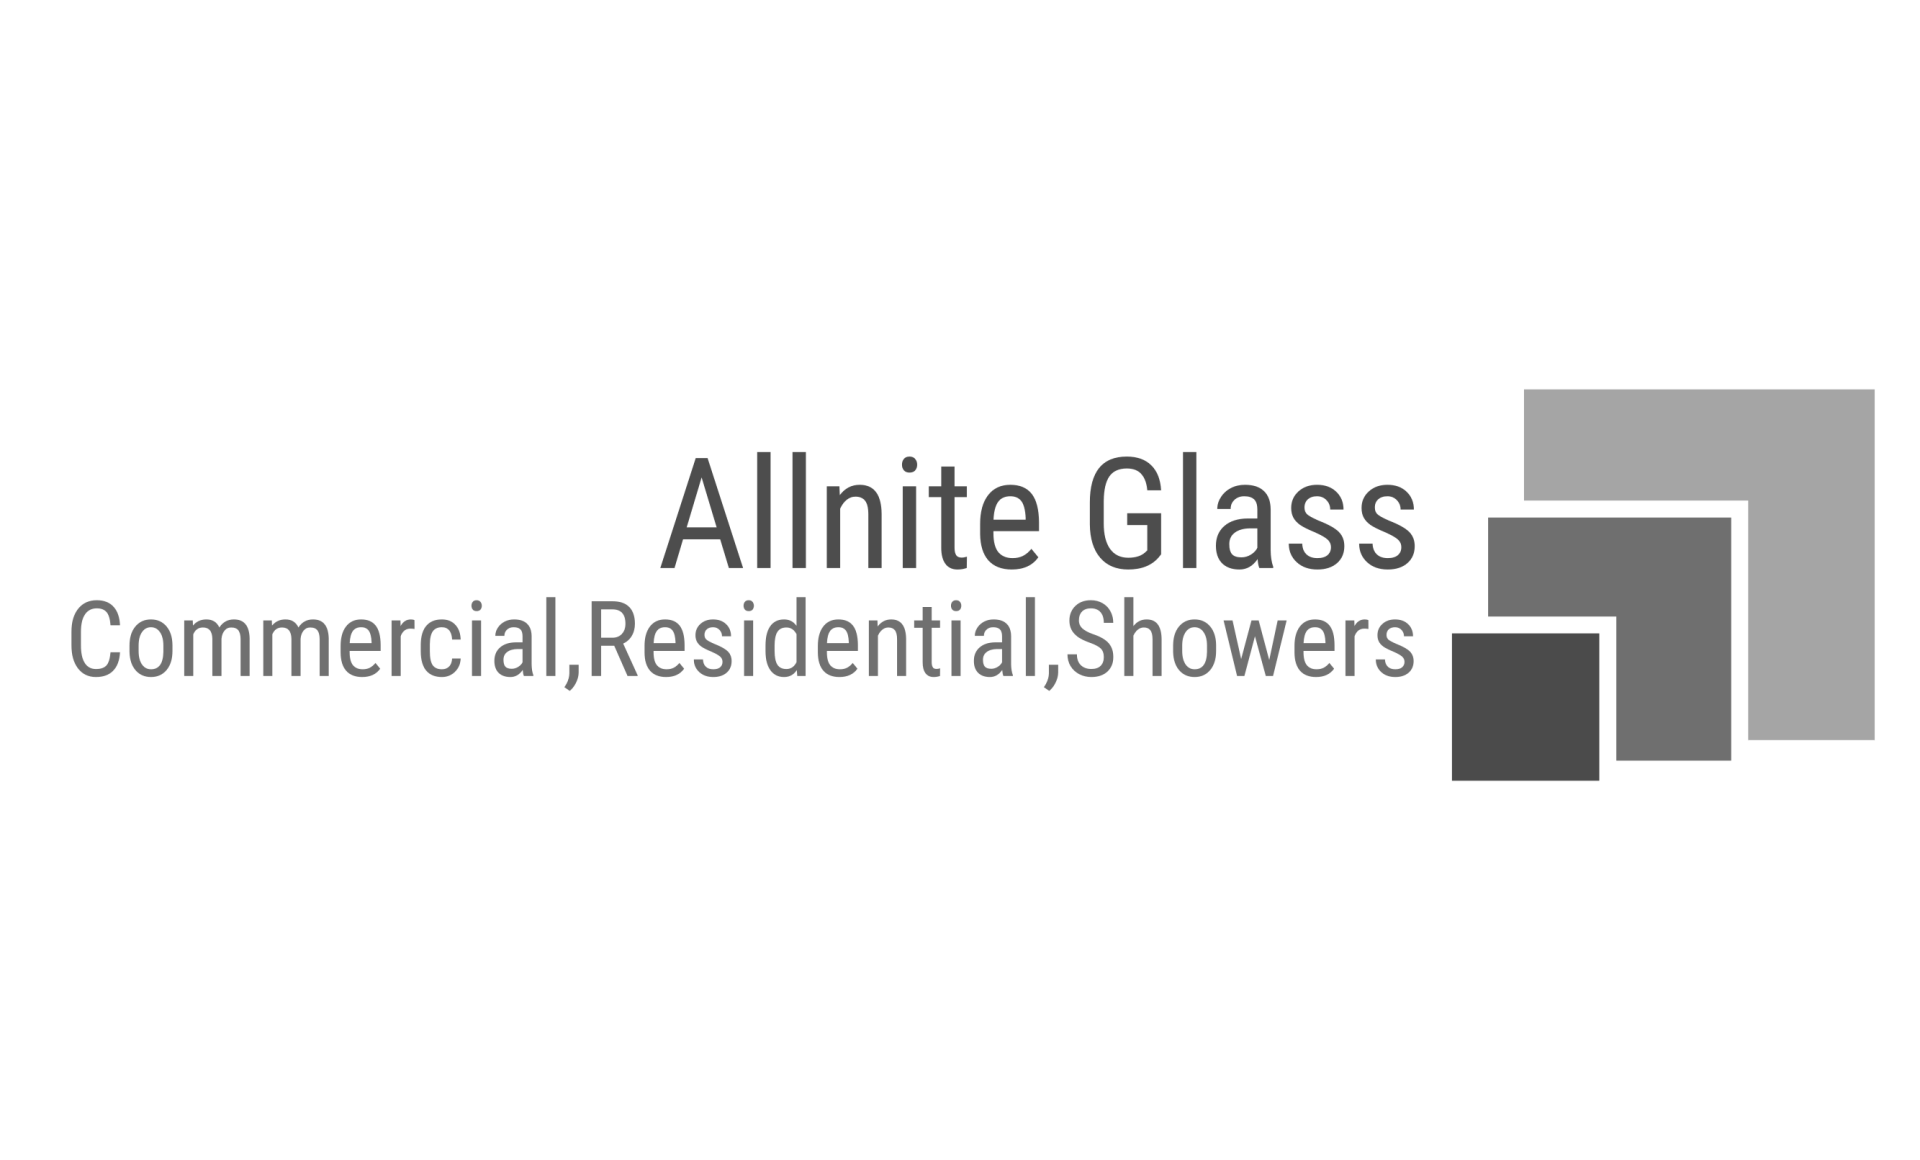 a logo for allnite glass commercial residential showers